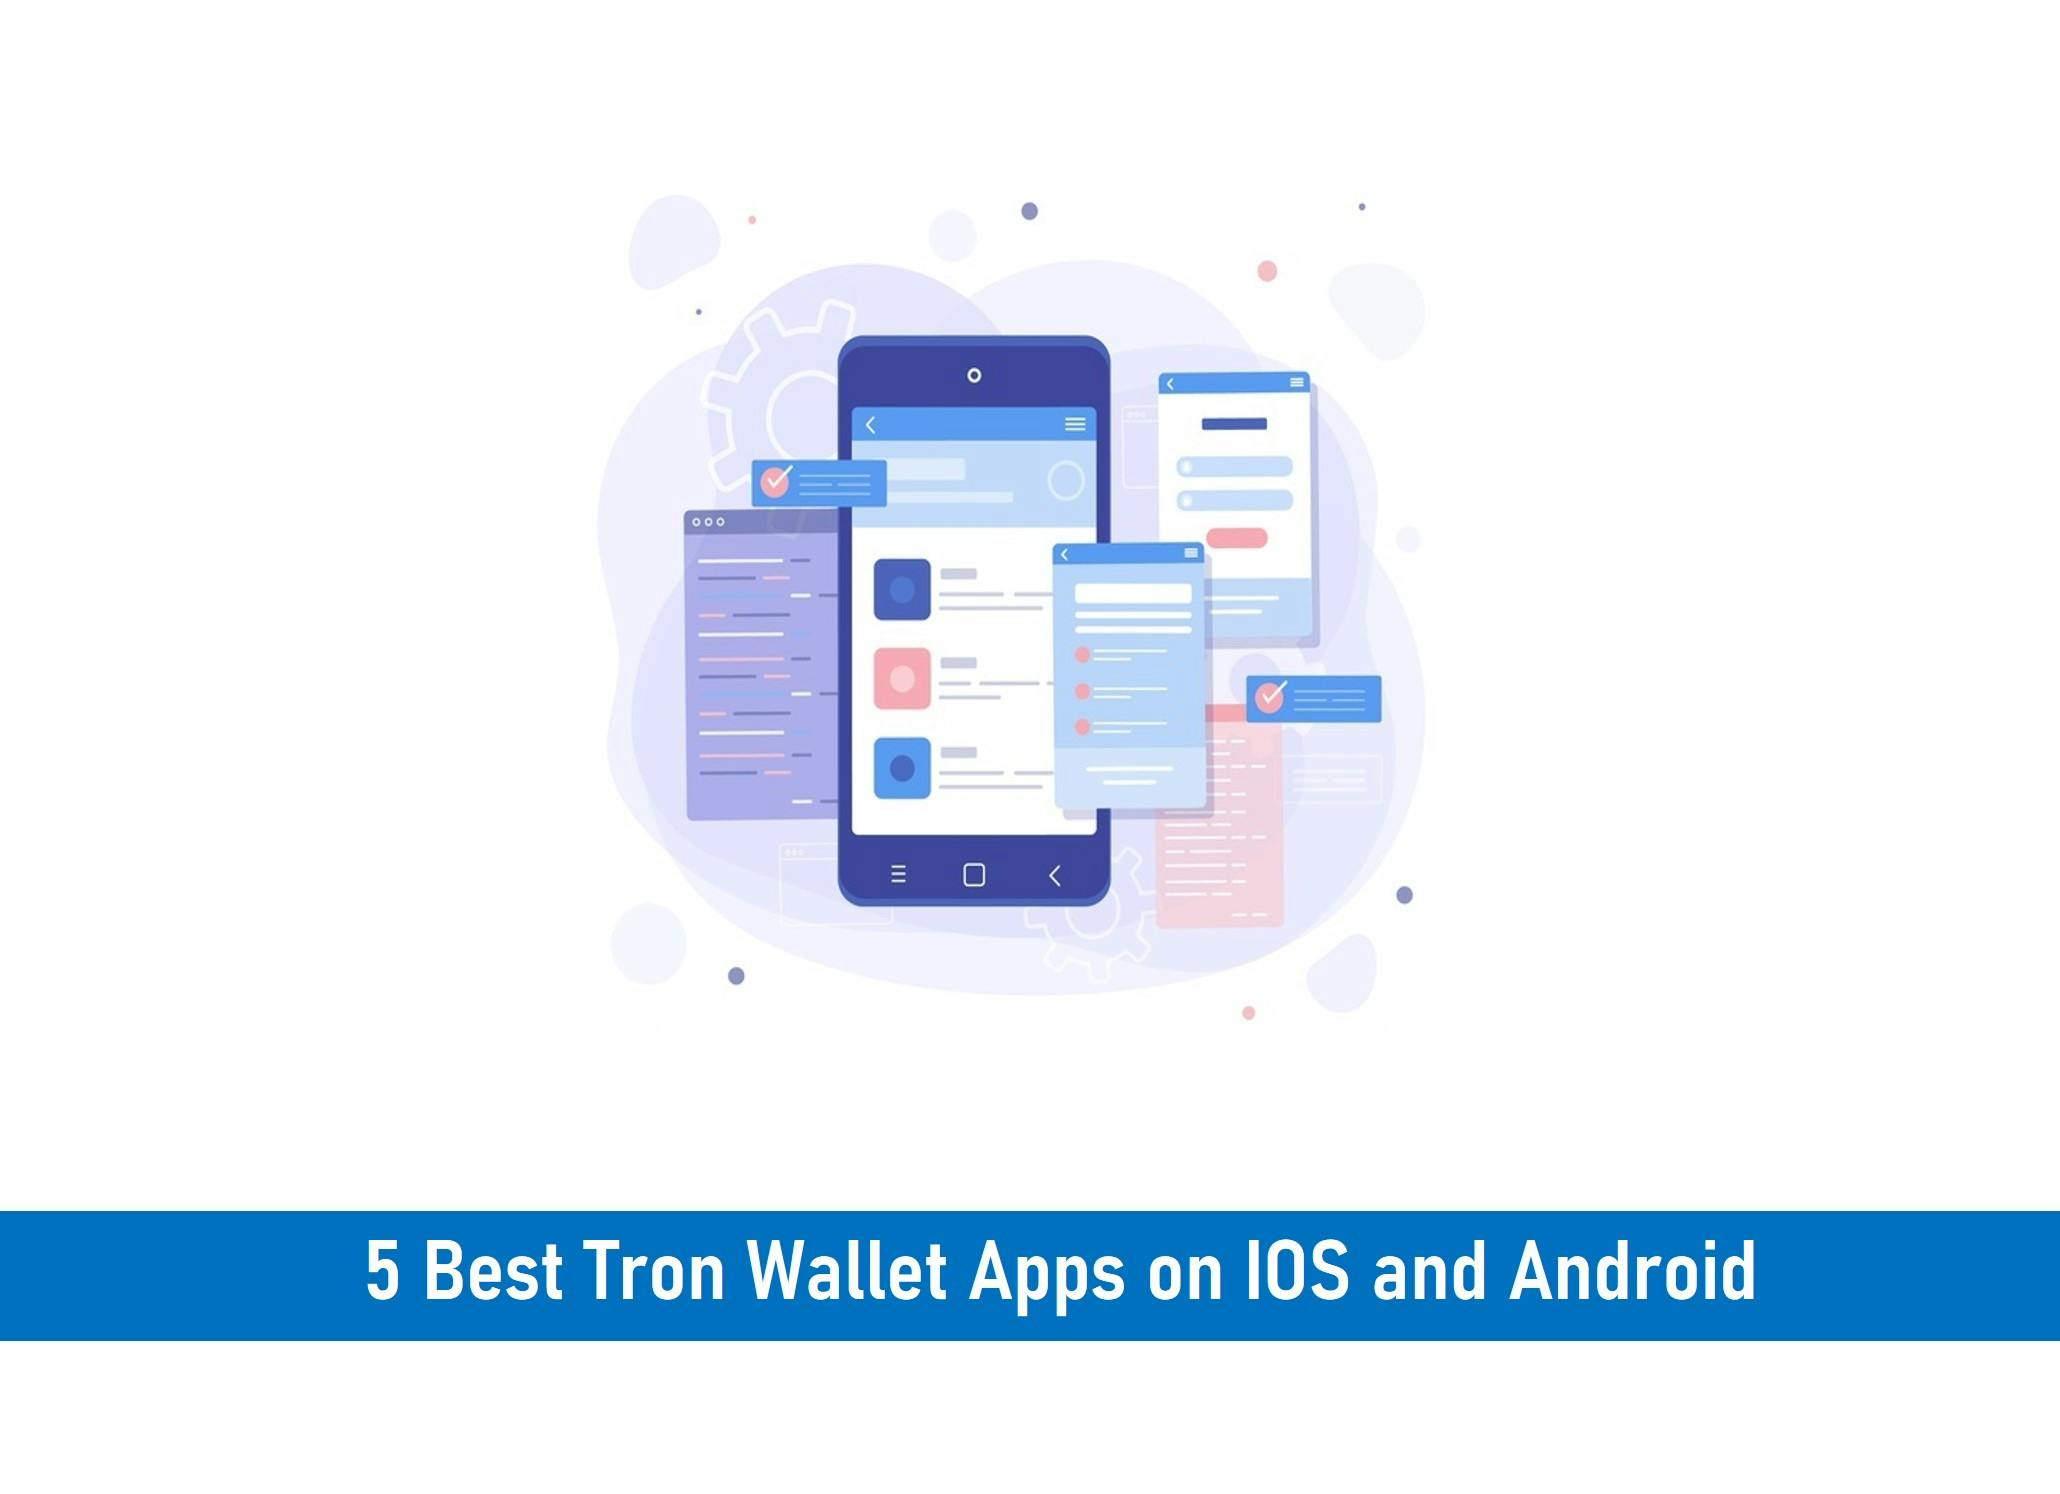 5 Best Tron Wallet Apps on IOS and Android